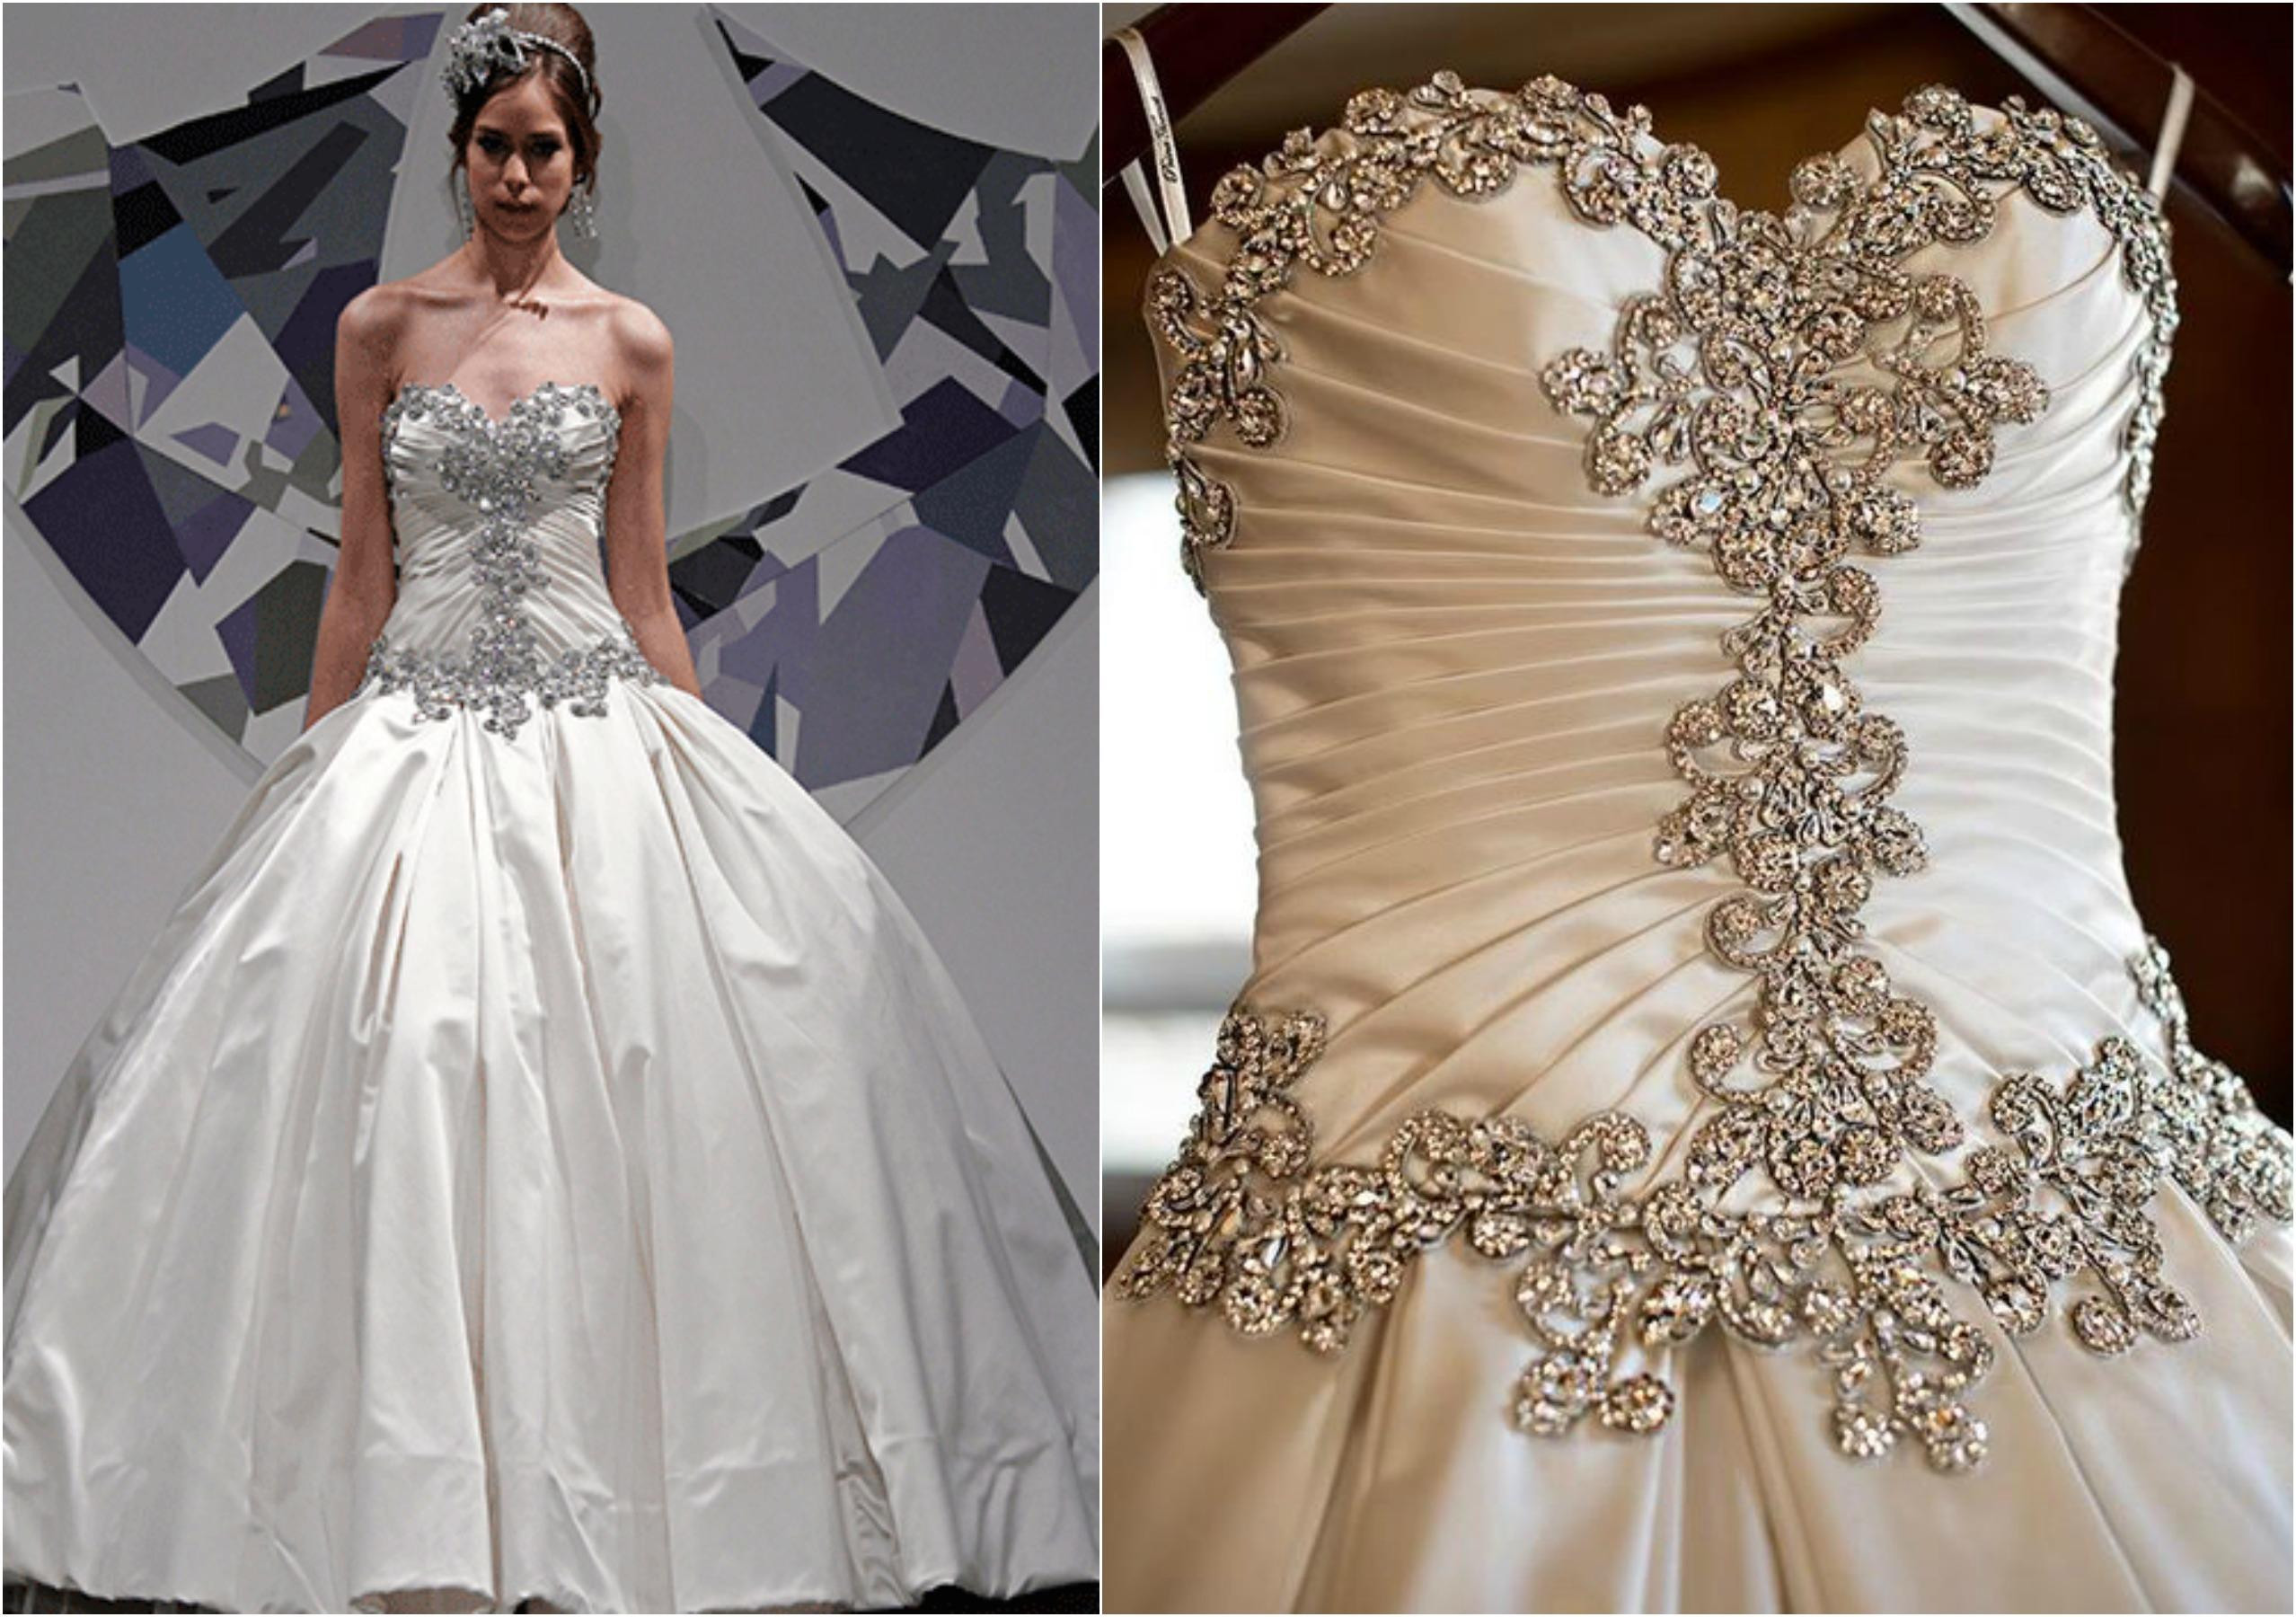 Pnina Wedding Dresses
 Pnina Tornai’s 10 Most Blinged Out Gowns TLCme